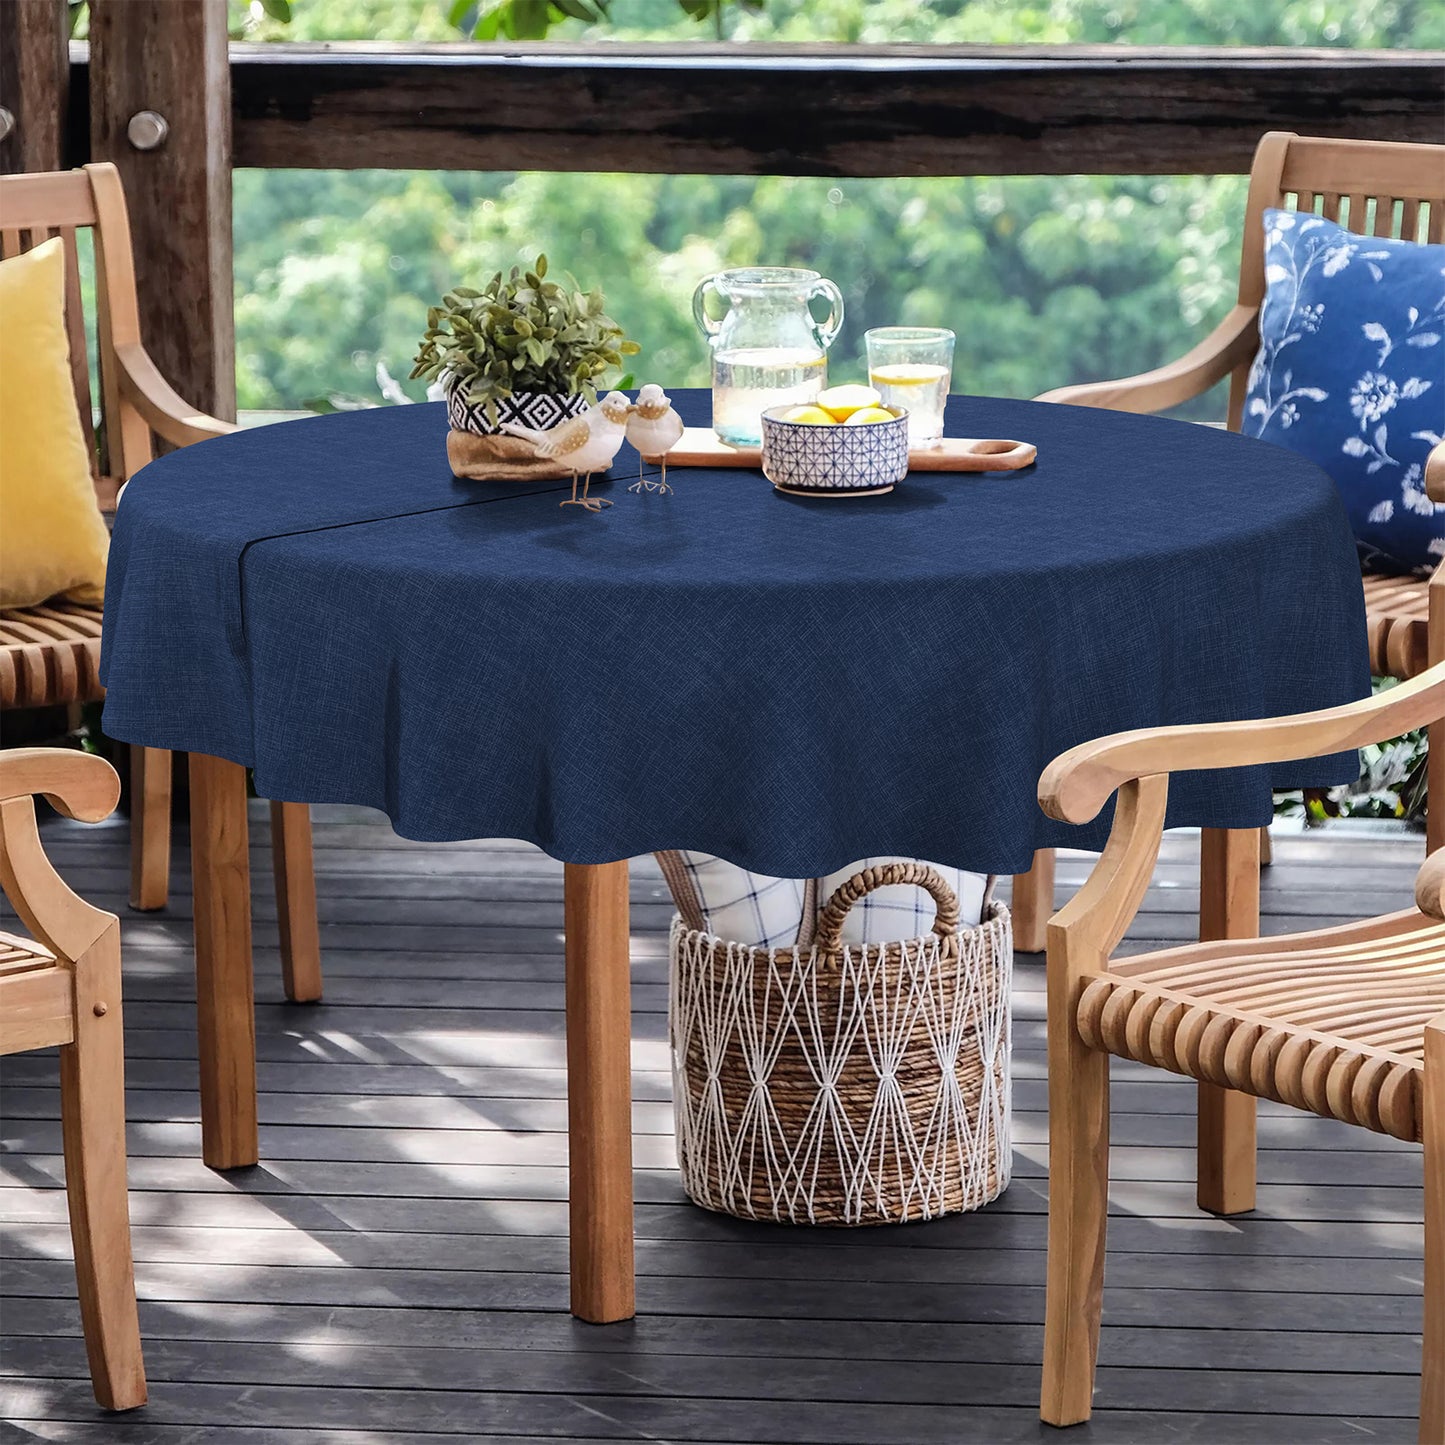 Melody Elephant Outdoor/Indoor Round Tablecloth with Umbrella Hole Zipper, Decorative Circular Table Cover for Home Garden, 60 Inch, Textured Navy